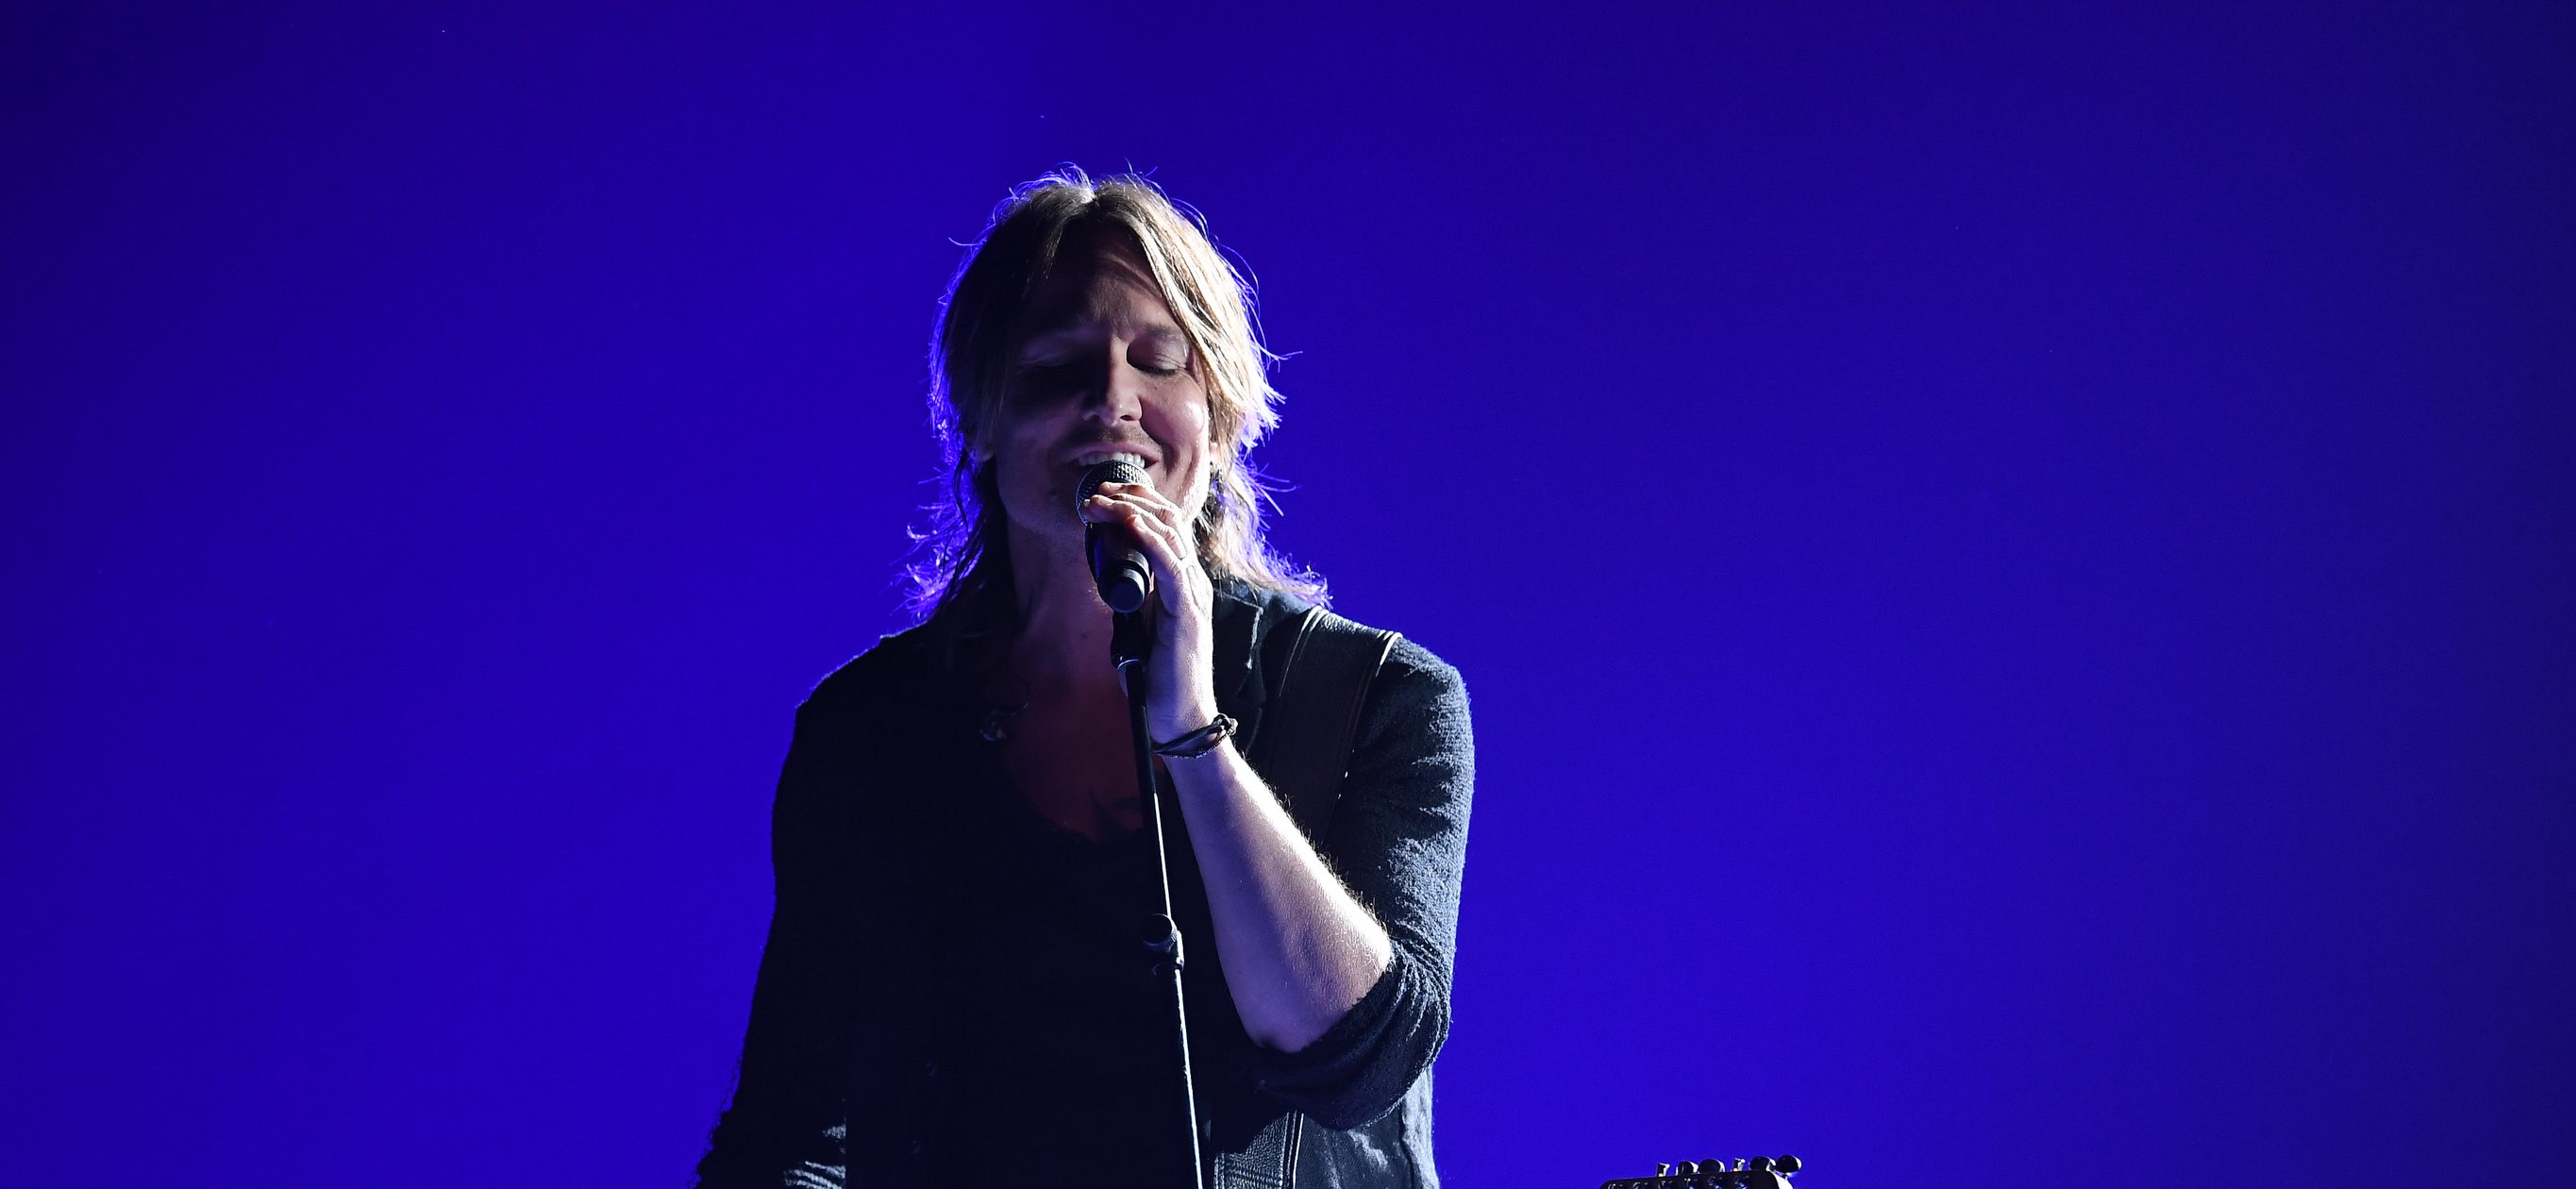 Keith Urban & Julia Michaels' "Coming Home" Coming Soon To 